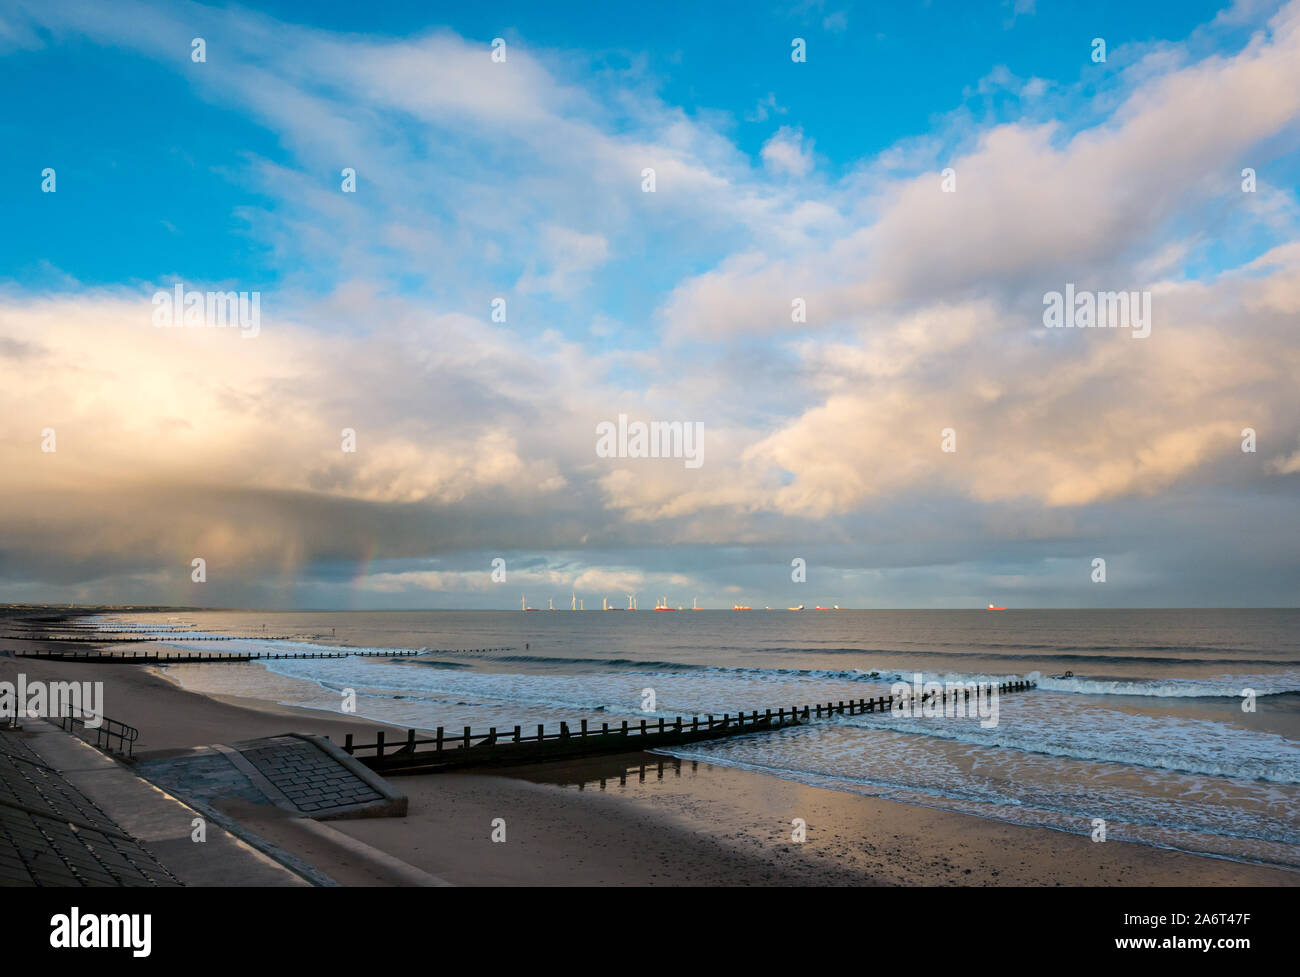 Aberdeen Beach, Aberdeen, Scotland, United Kingdom, 28th October 2019. UK Weather: sunshine and showers in the city cause a bright rainbow at sunset over the North Sea looking towards the wind farm in Aberdeen Bay Stock Photo